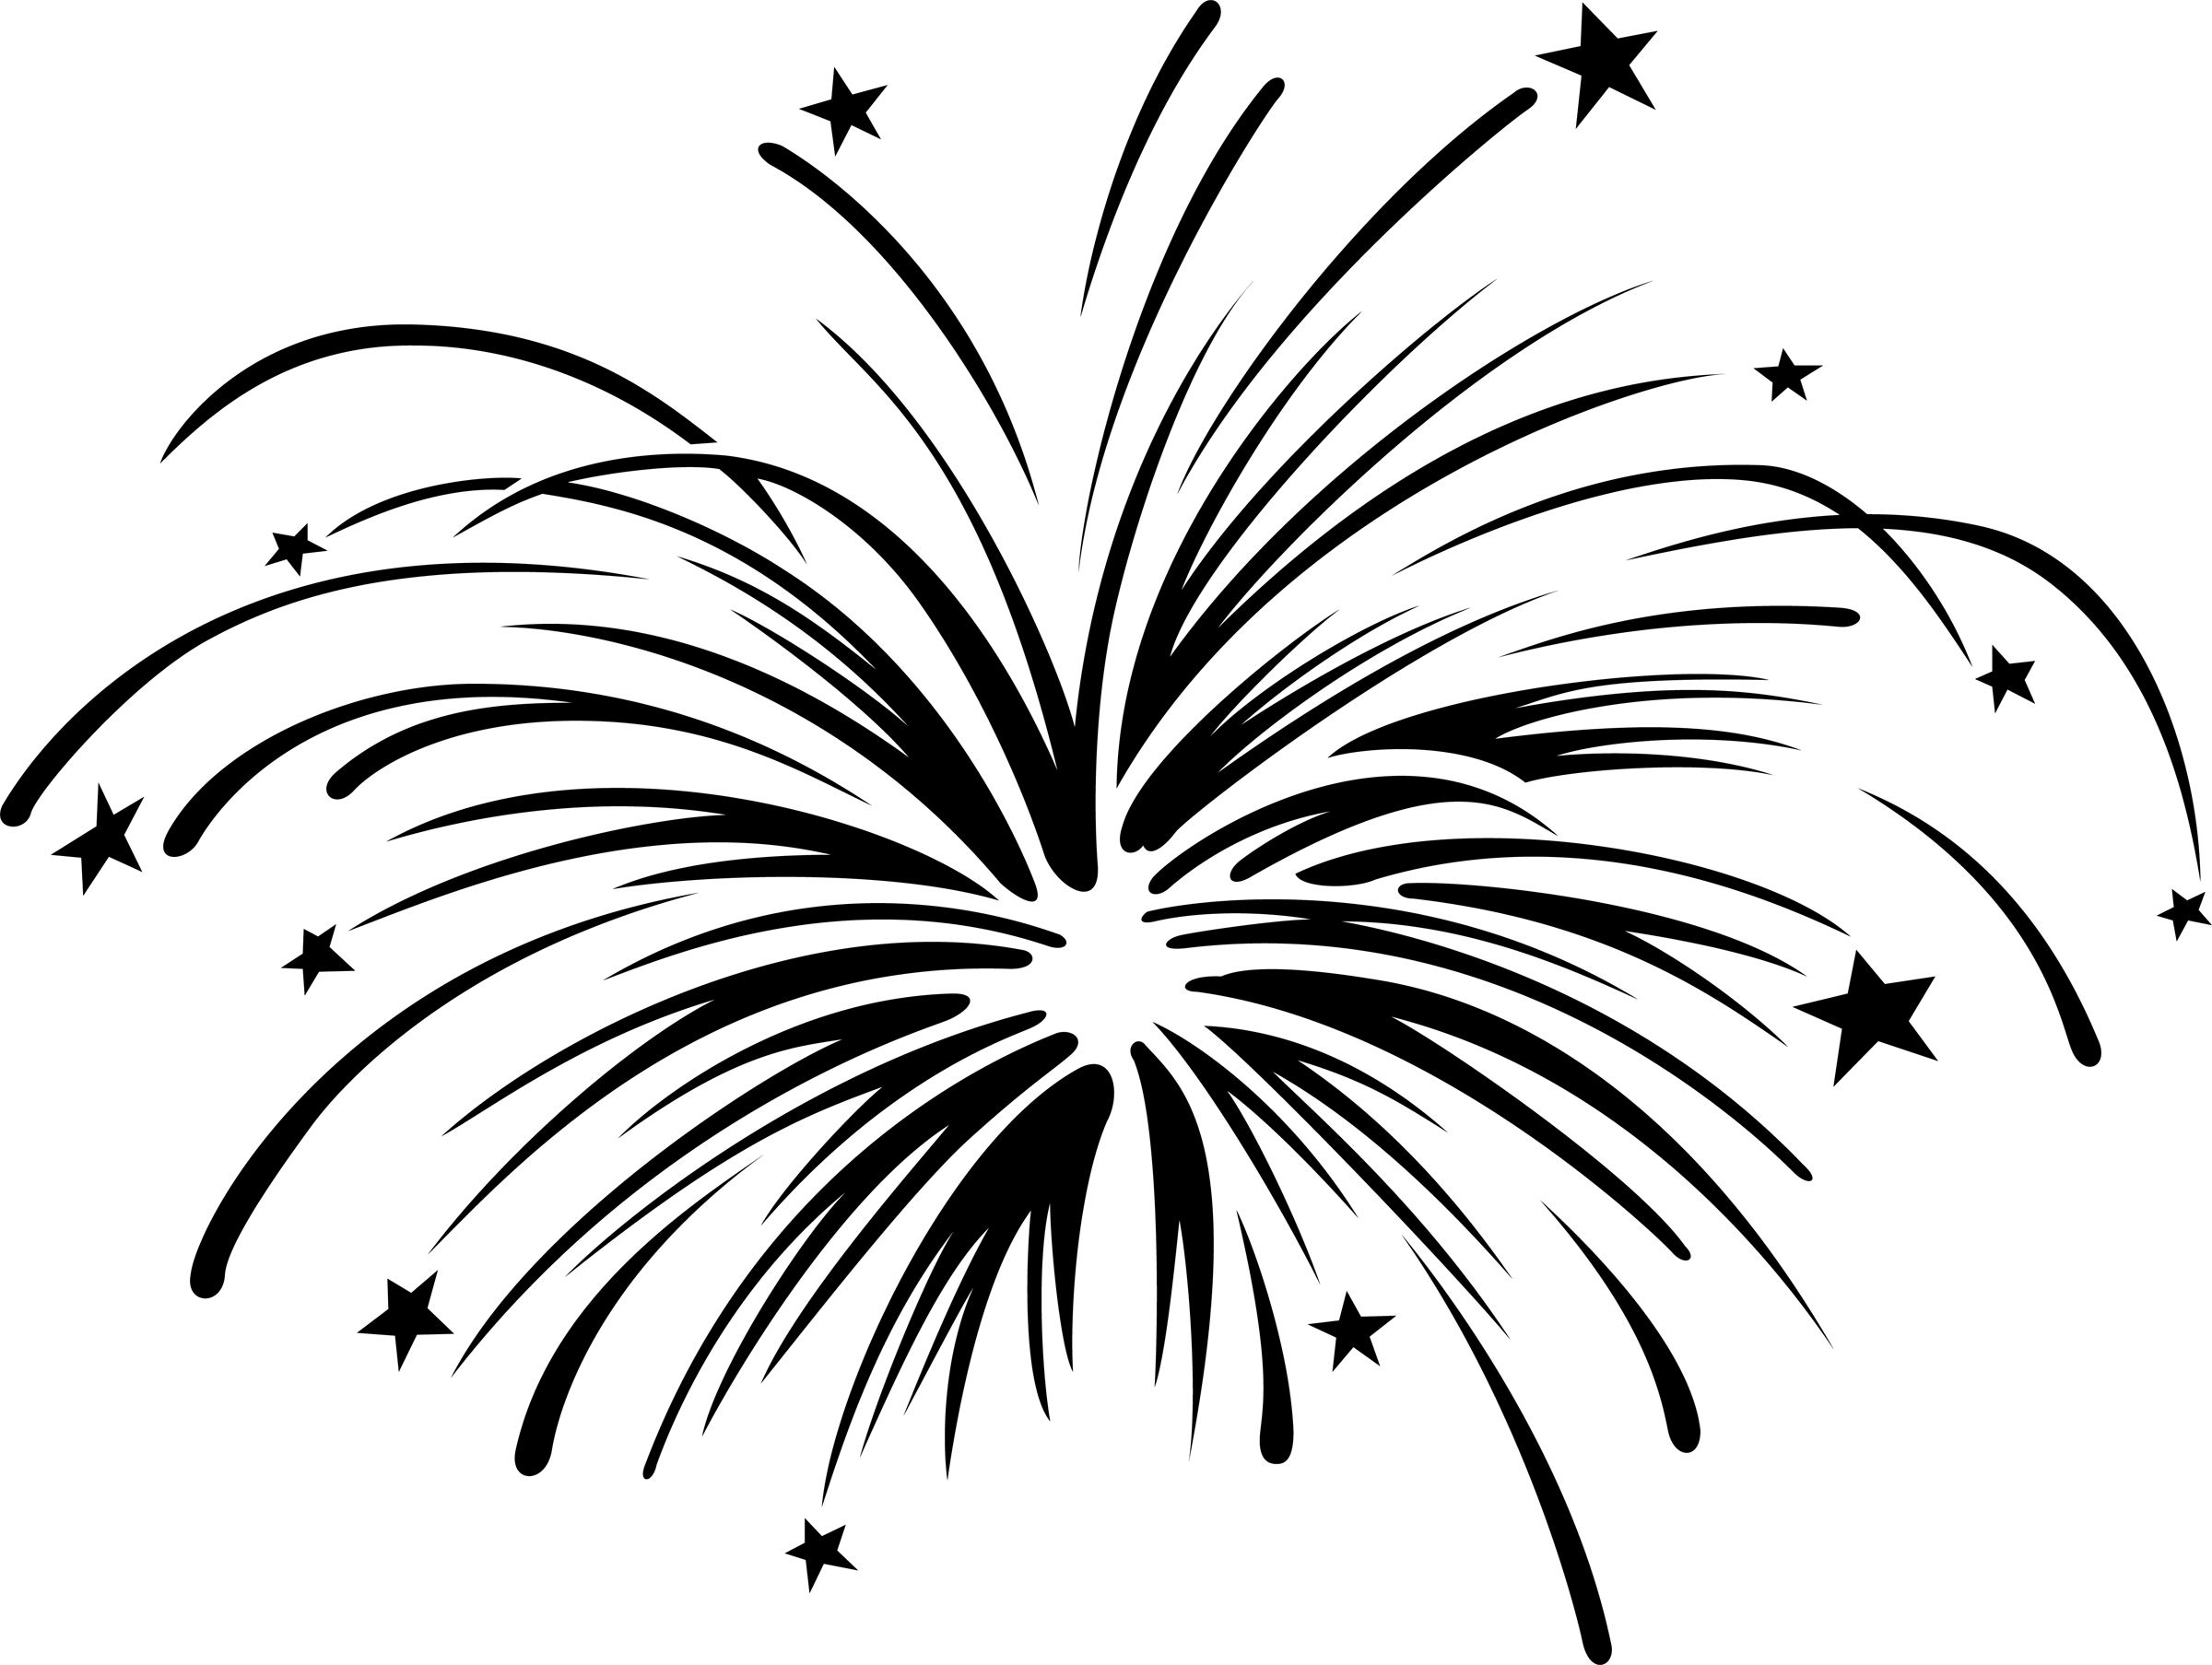 Fireworks clipart with.